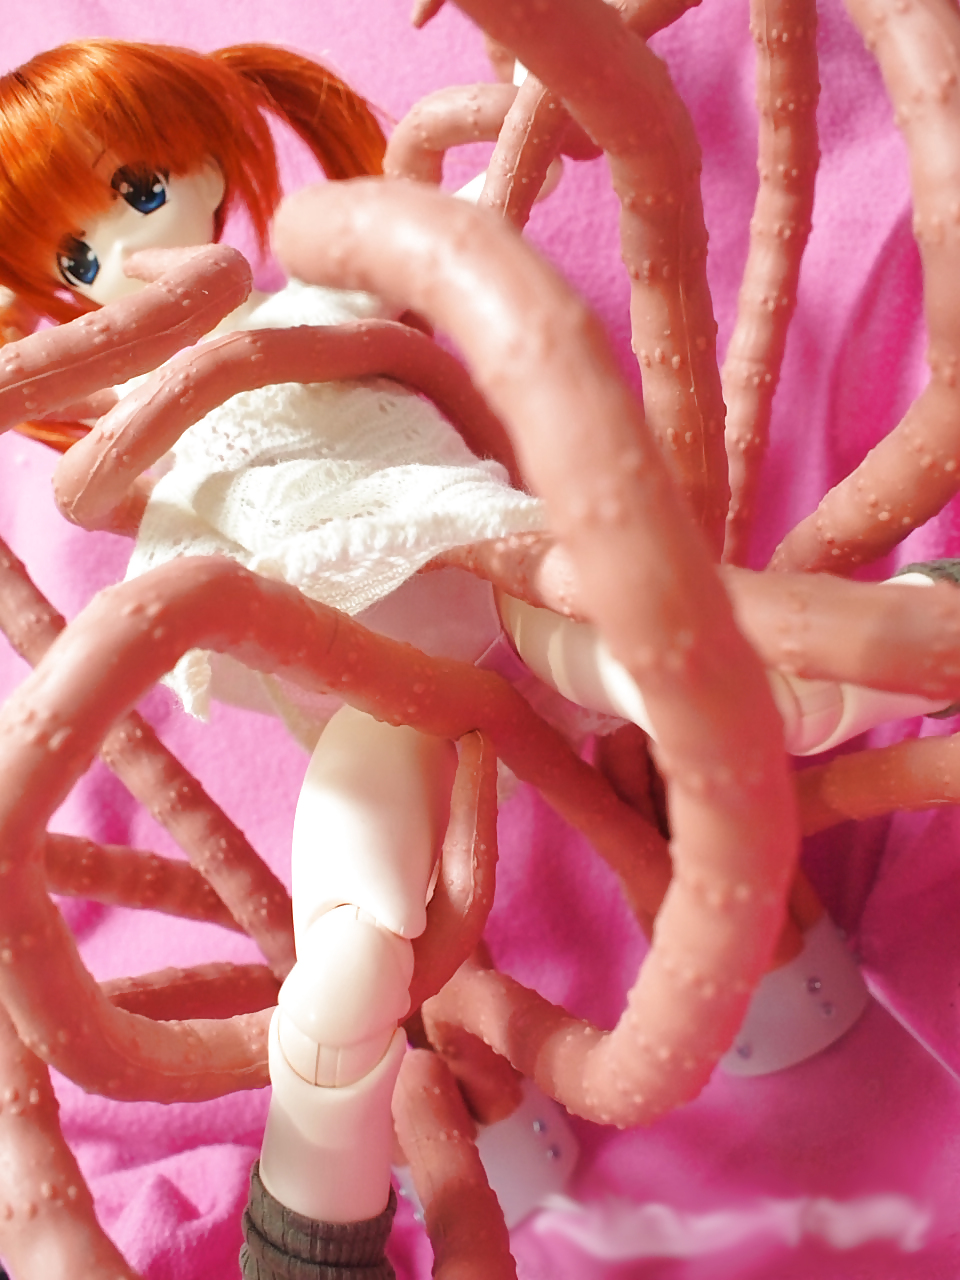 Other People's Dolls 8: More Tentacles! #18563660